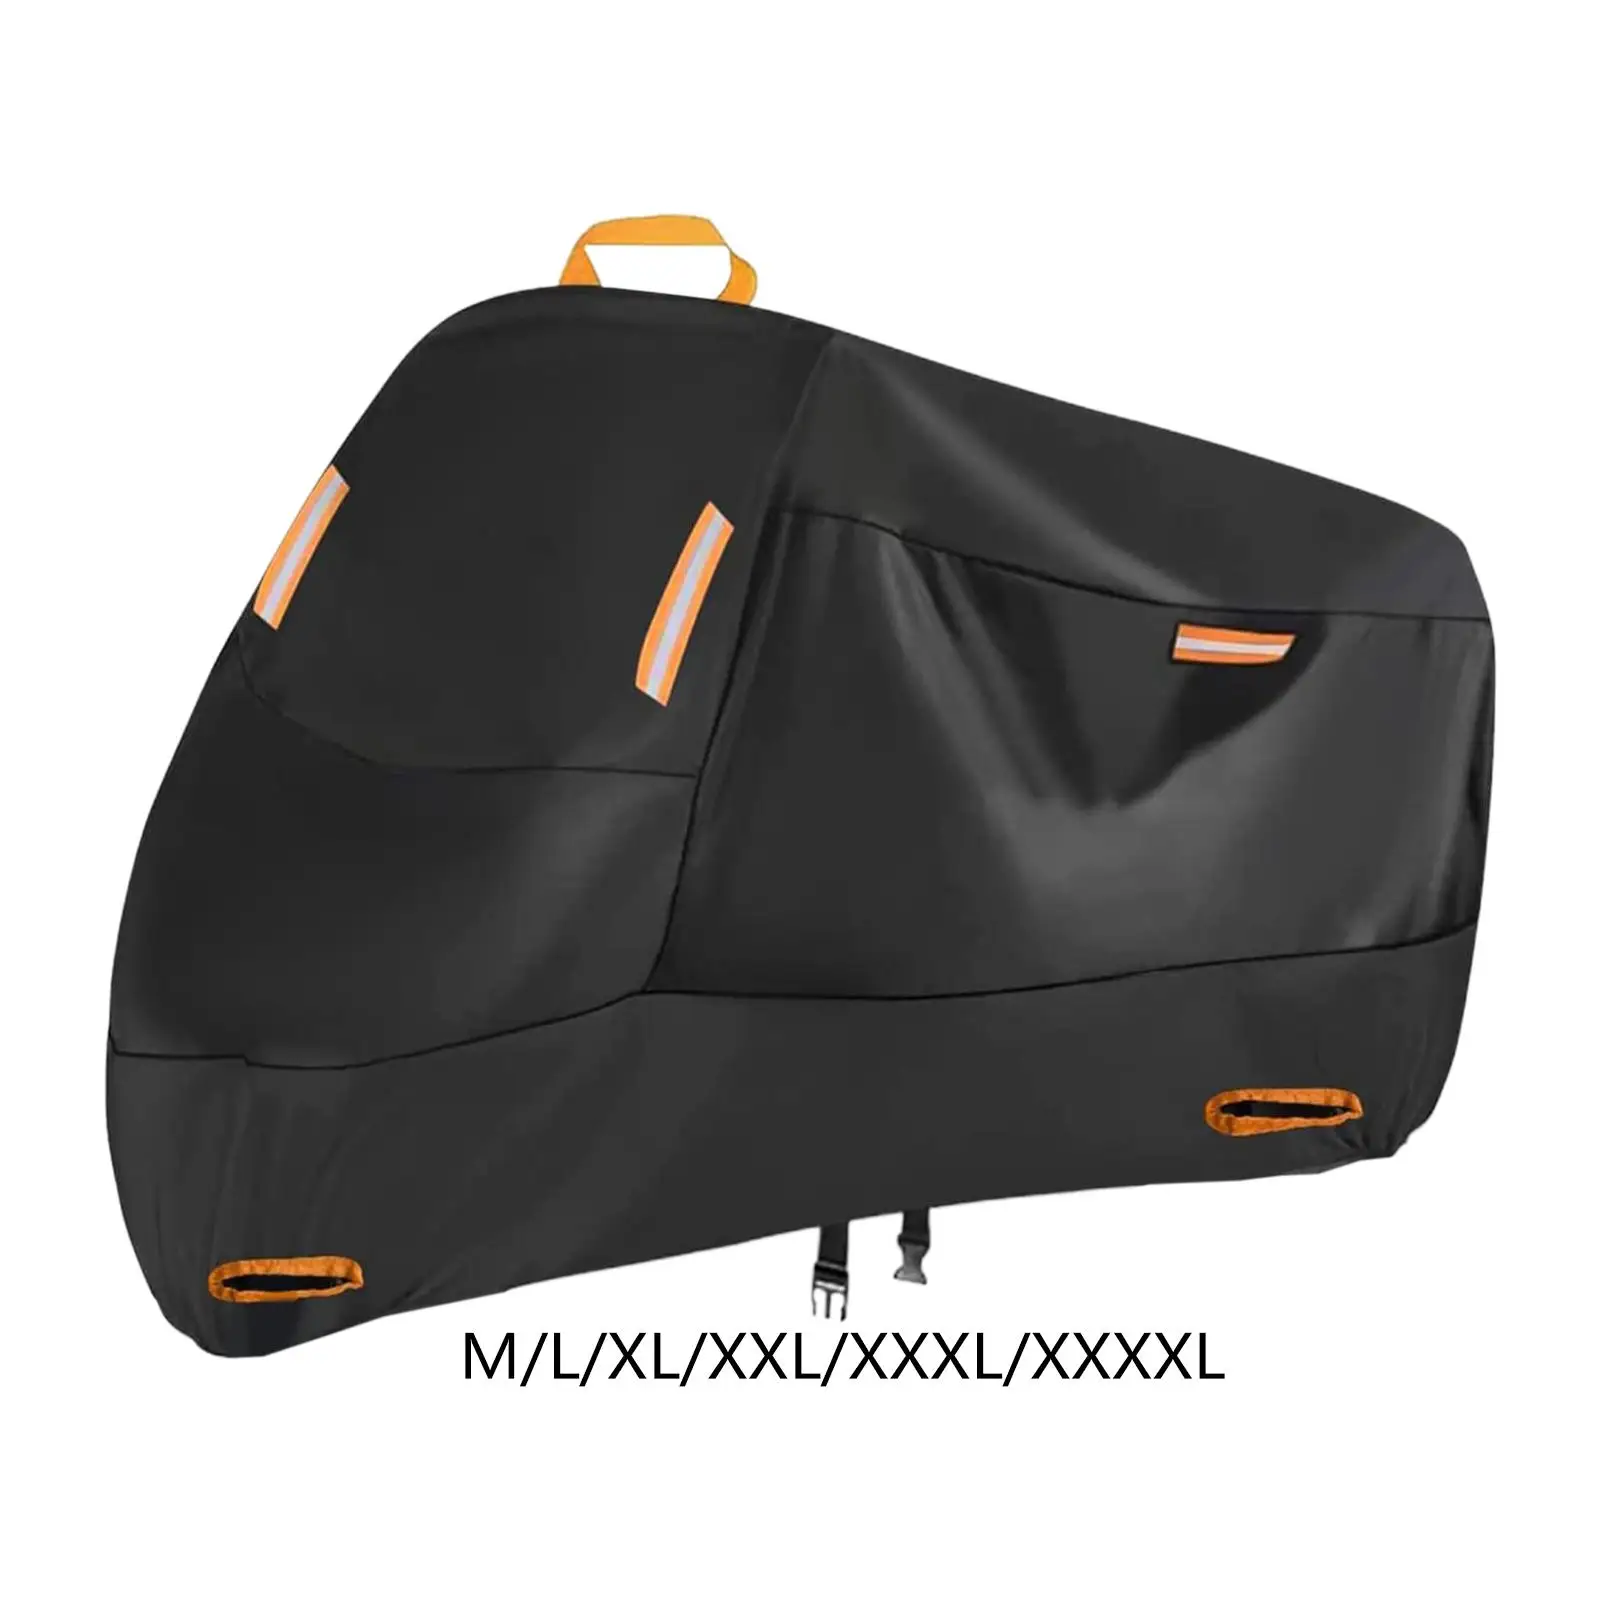 Motorcycle Cover Dustproof Scooter Cover for Motorbike Bike All Season